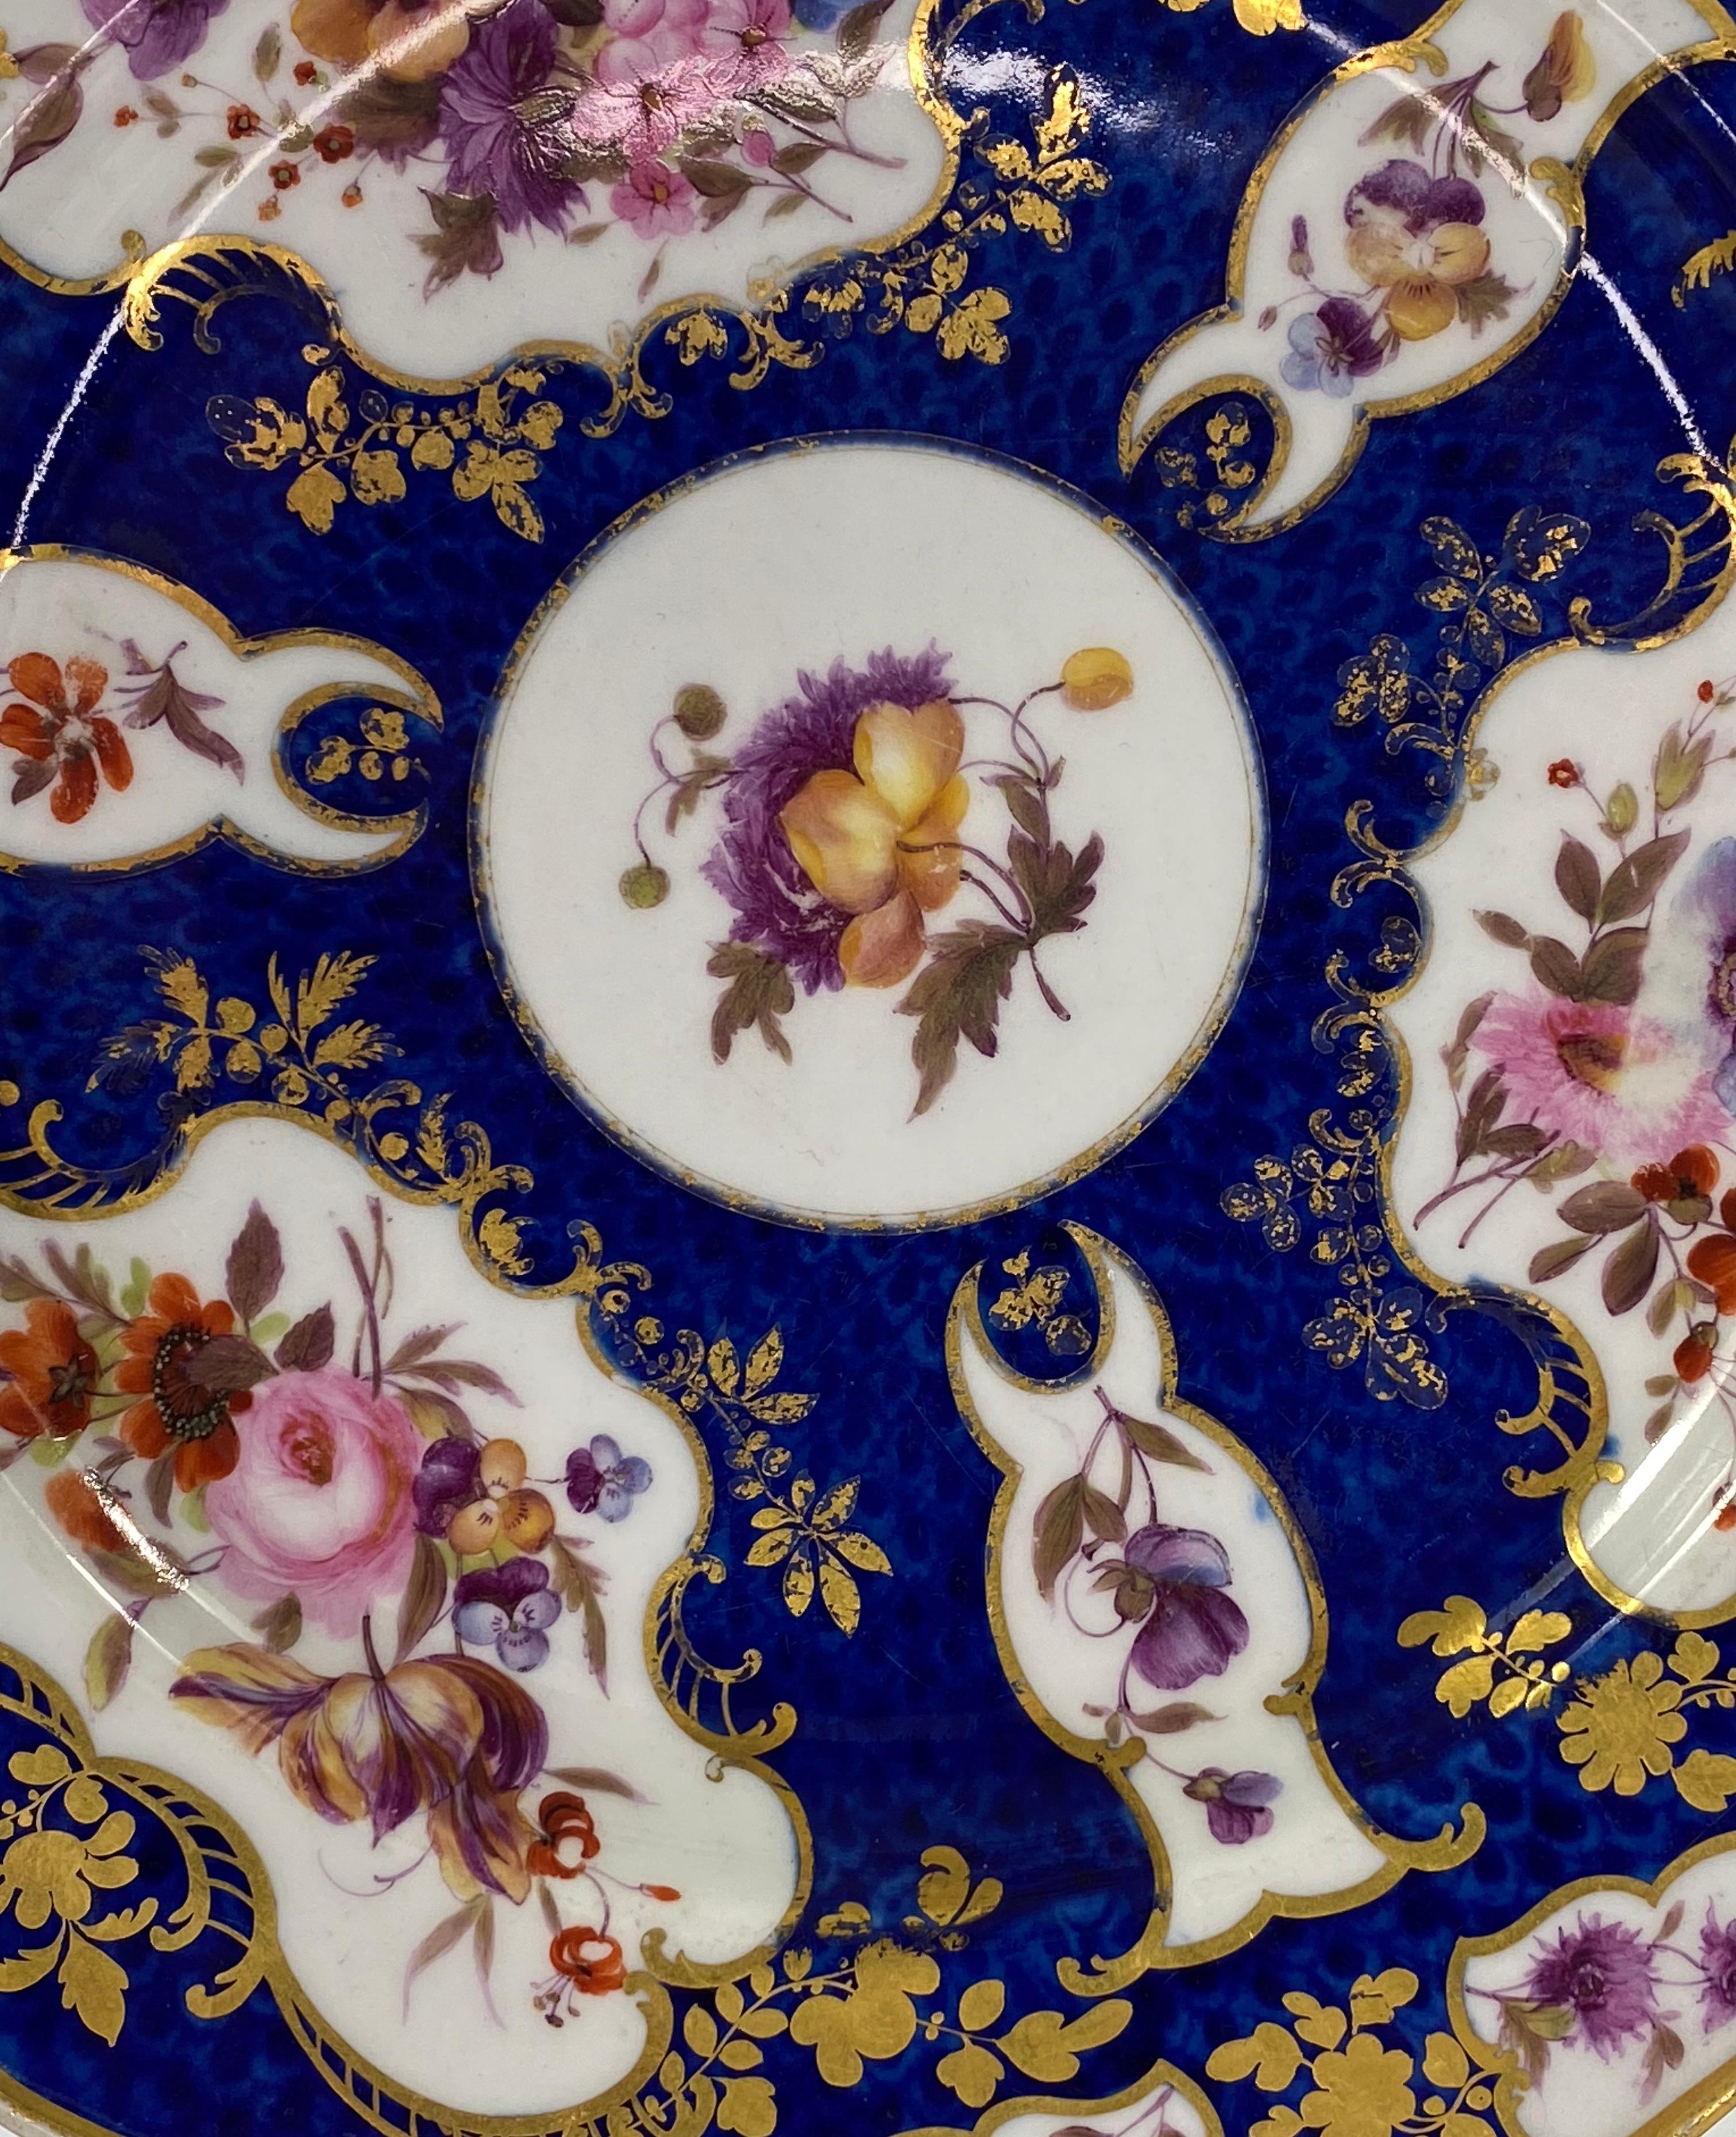 Flight Barr and Barr Worcester porcelain dish, c. 1815, with interesting provenance. The ‘Blue Scale’ ground dish painted with elaborate gilt scroll panels, containing beautifully painted studies of flowers.
The reverse with a label suggesting that